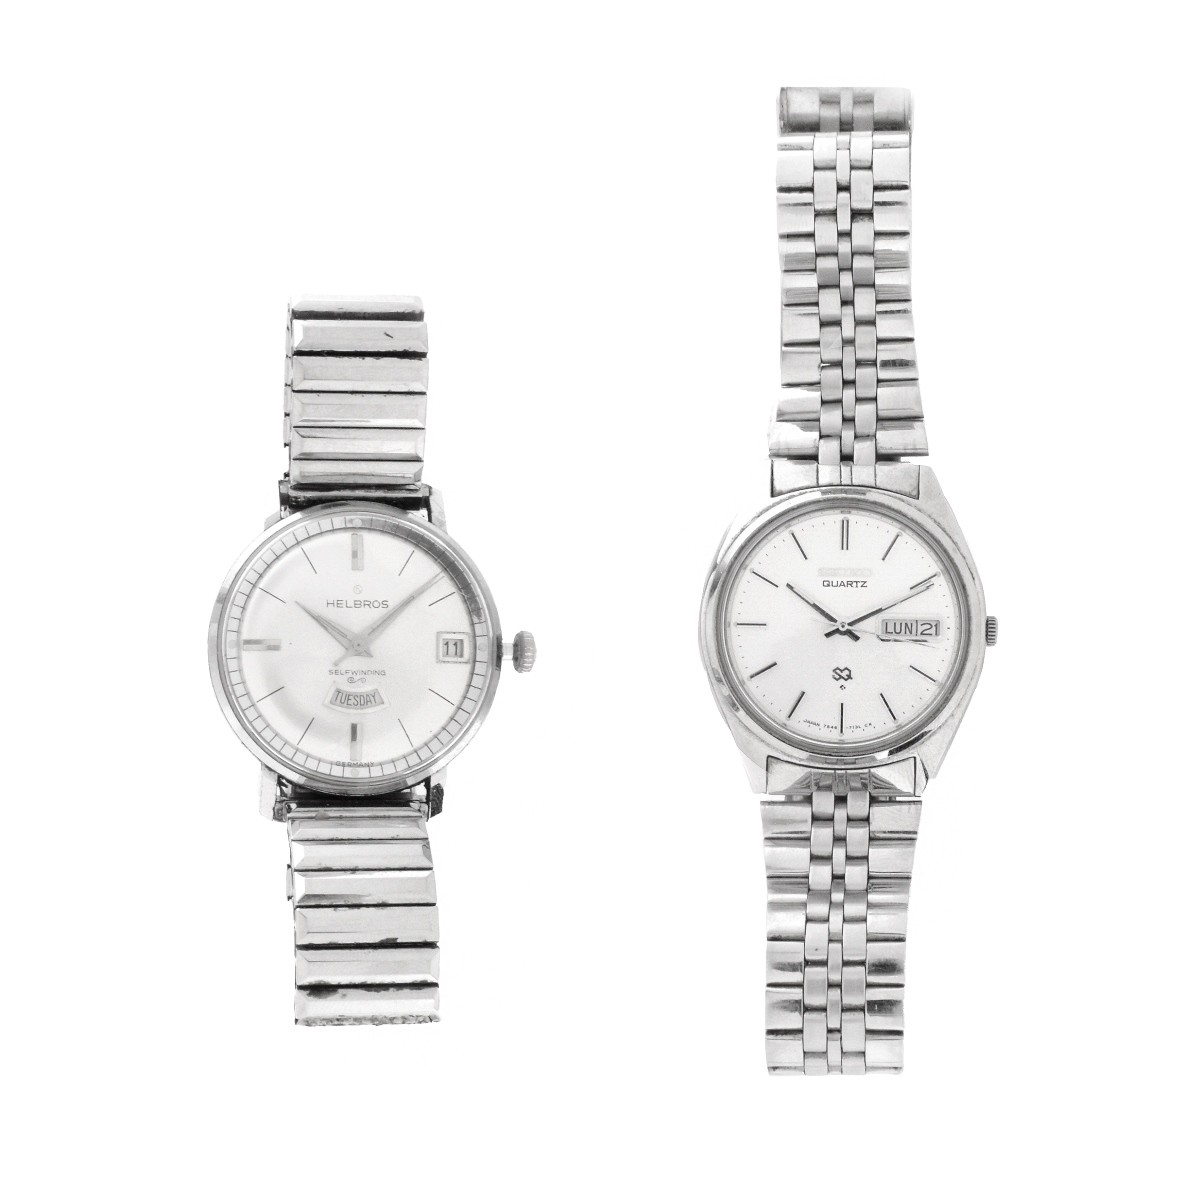 Two (2) Men's Vintage Stainless Steel Watches